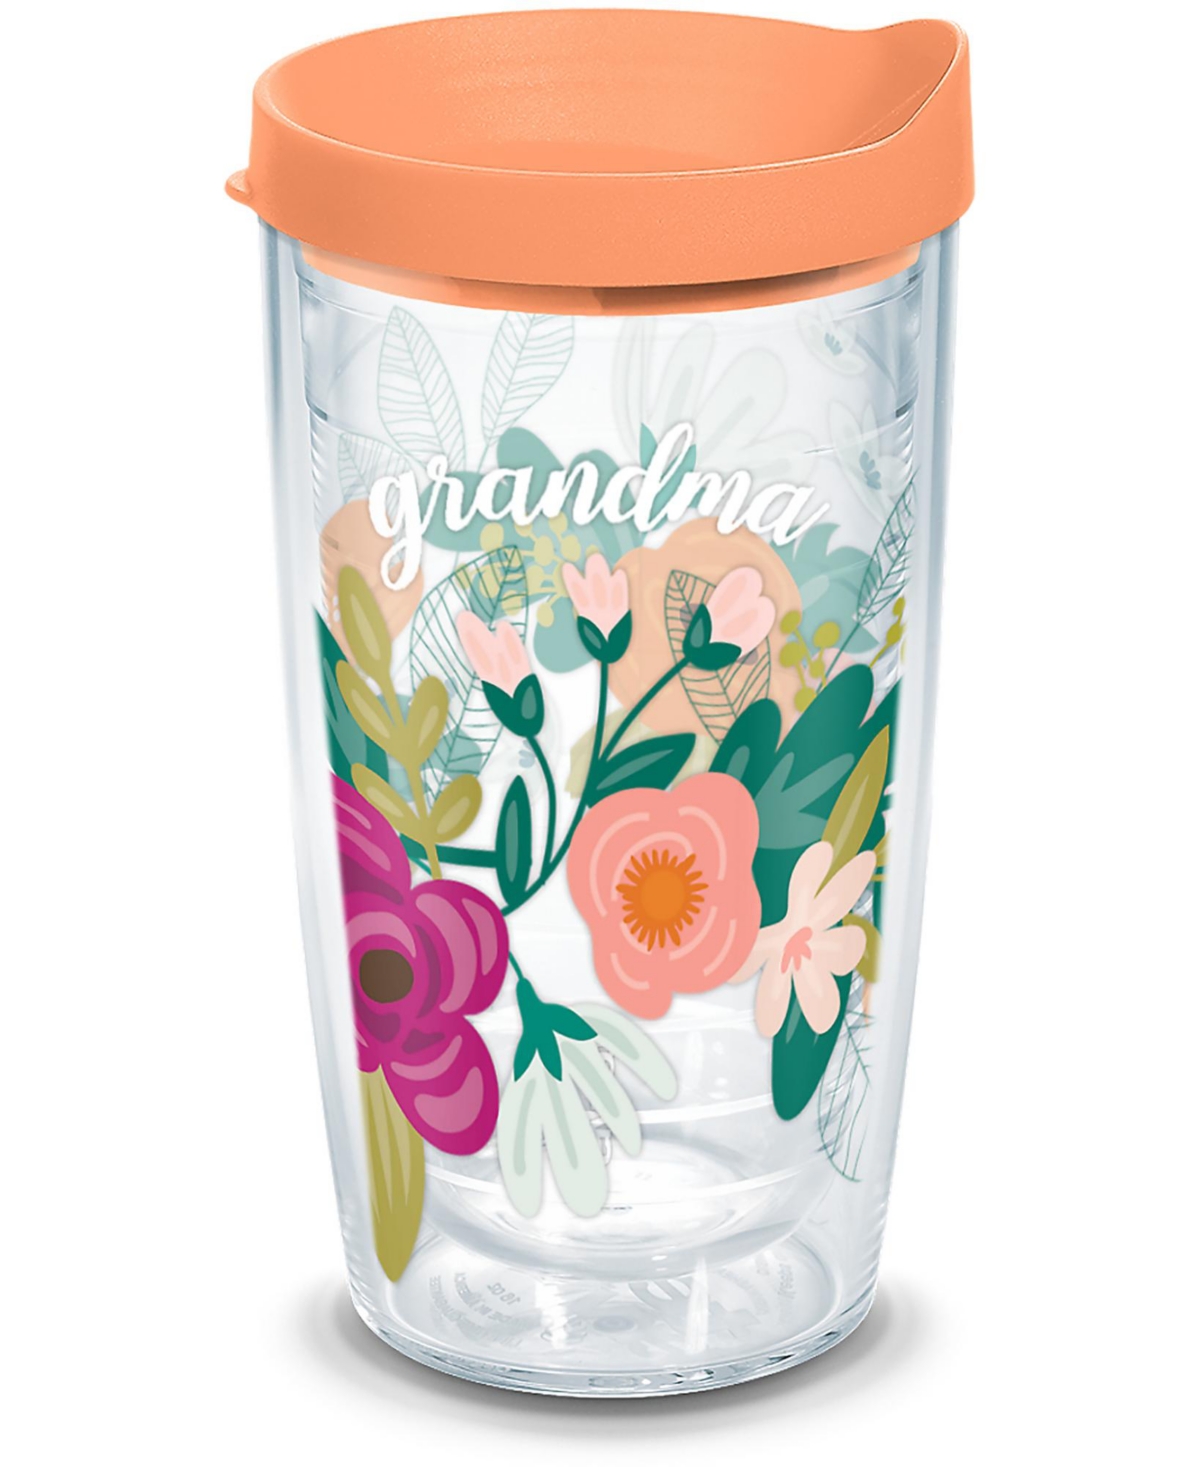 Tervis Tumbler Tervis Grandma Floral Made In Usa Double Walled Insulated Tumbler Travel Cup Keeps Drinks Cold & Hot In Open Miscellaneous